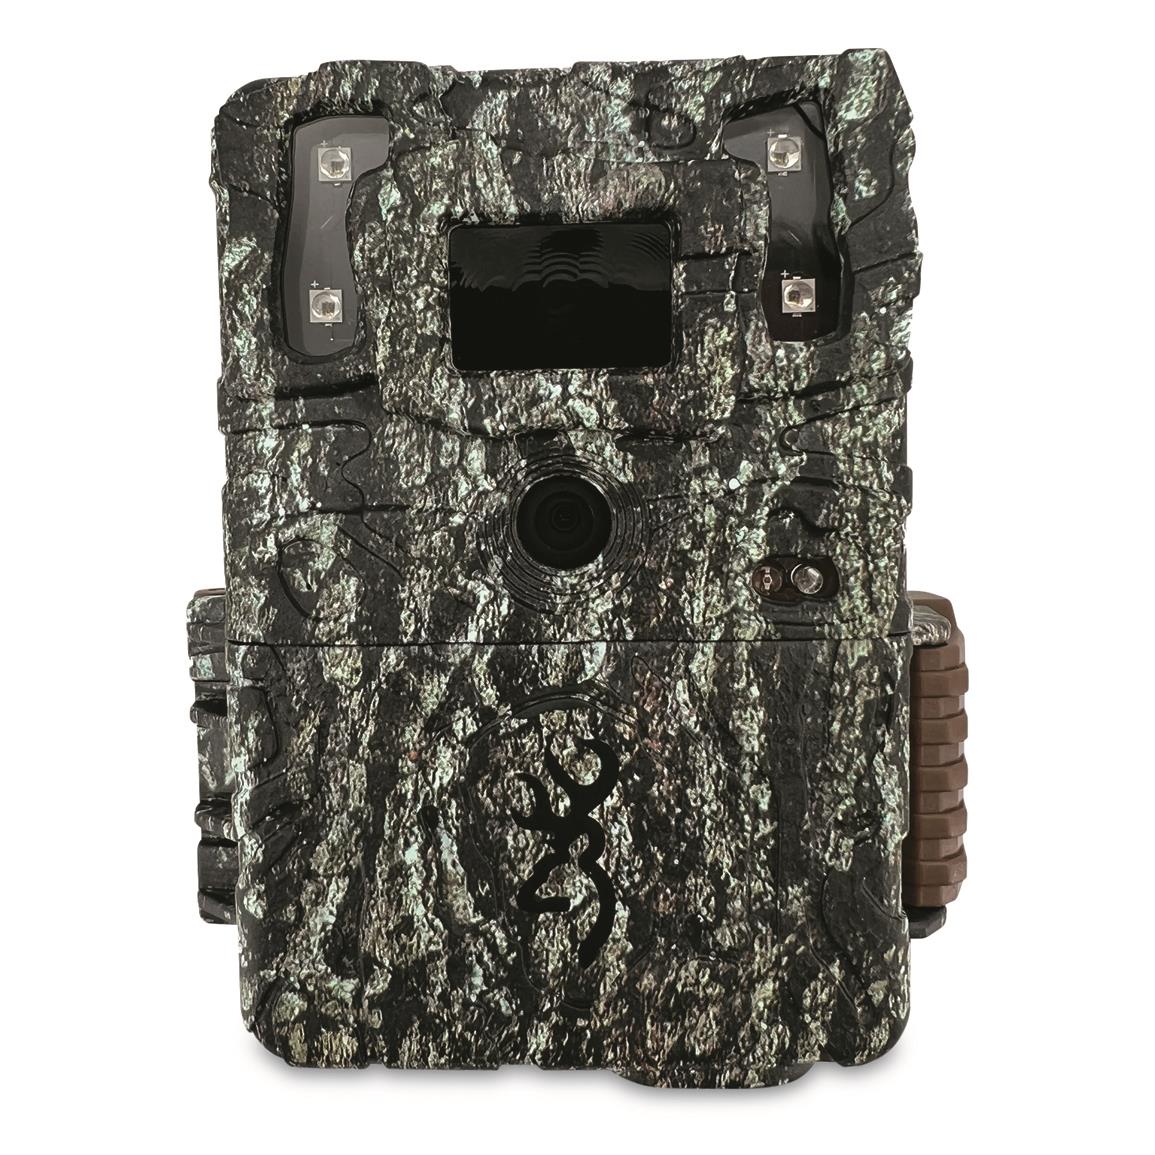 Browning Command OPS Elite 22 Trail/Game Camera, 22MP